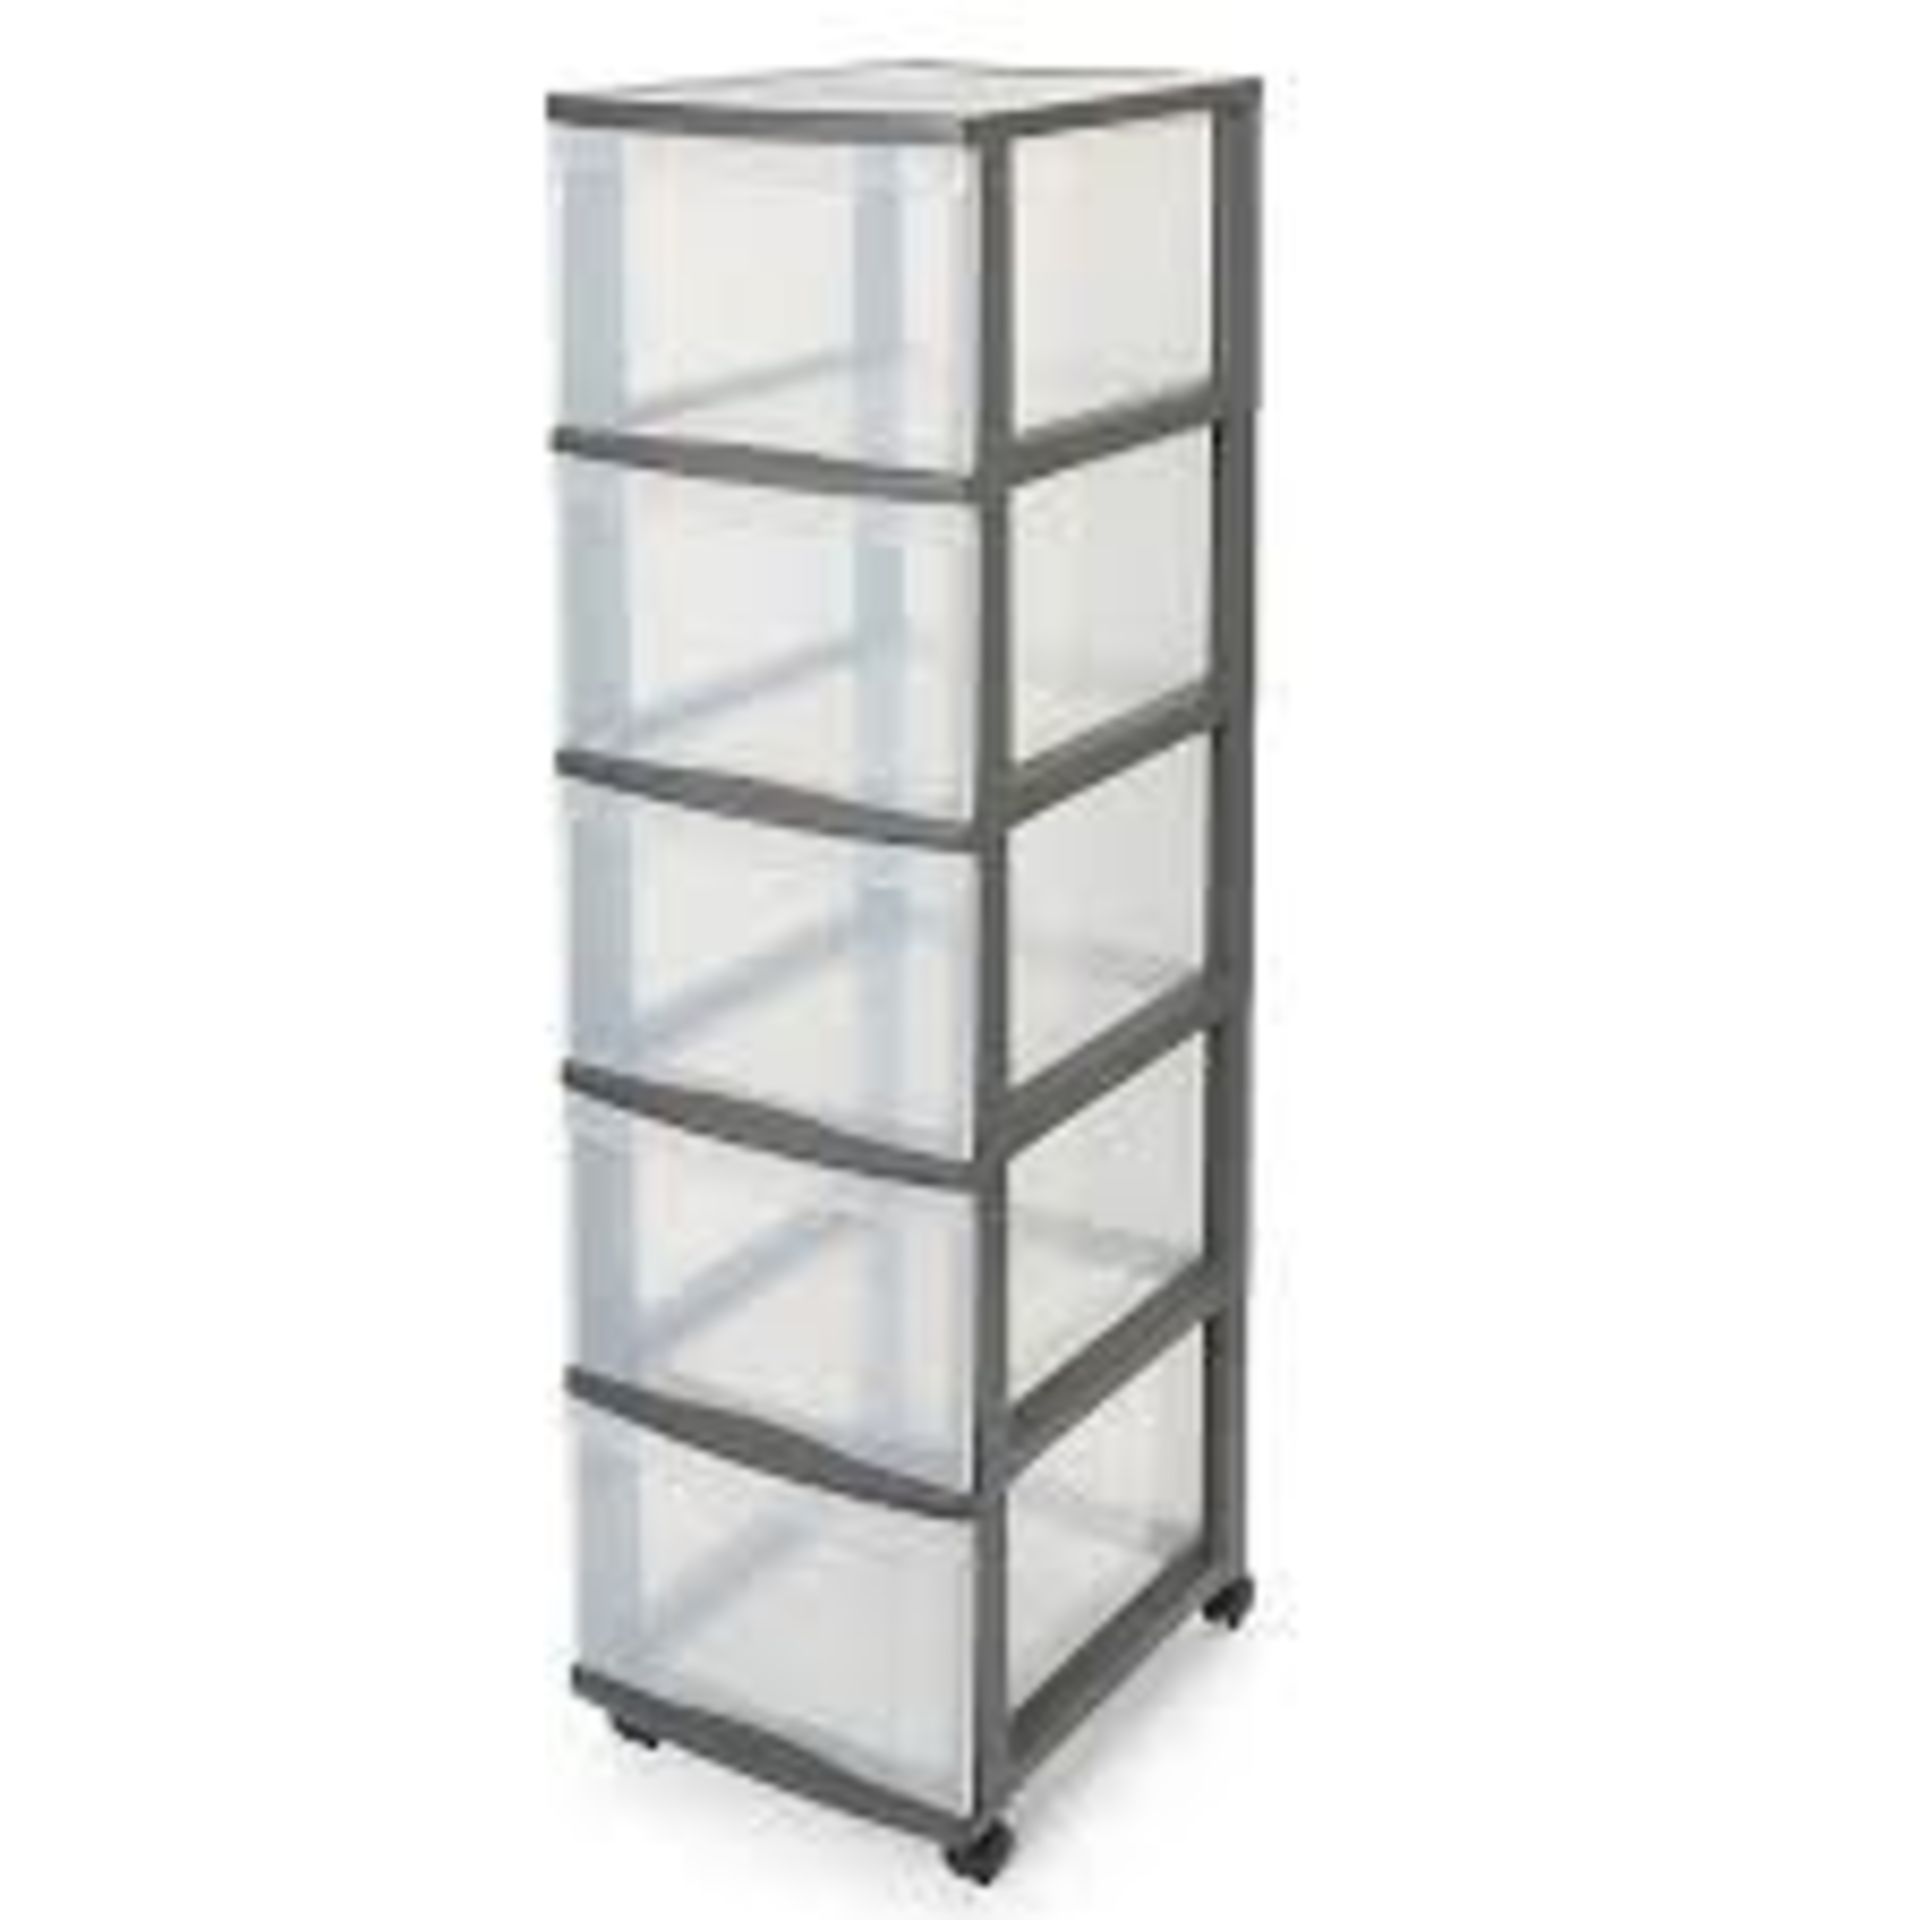 Full Artic Load including 587 items of various stock to include: Doors, Metal Shelfs, Coffee Tabl - Image 6 of 6